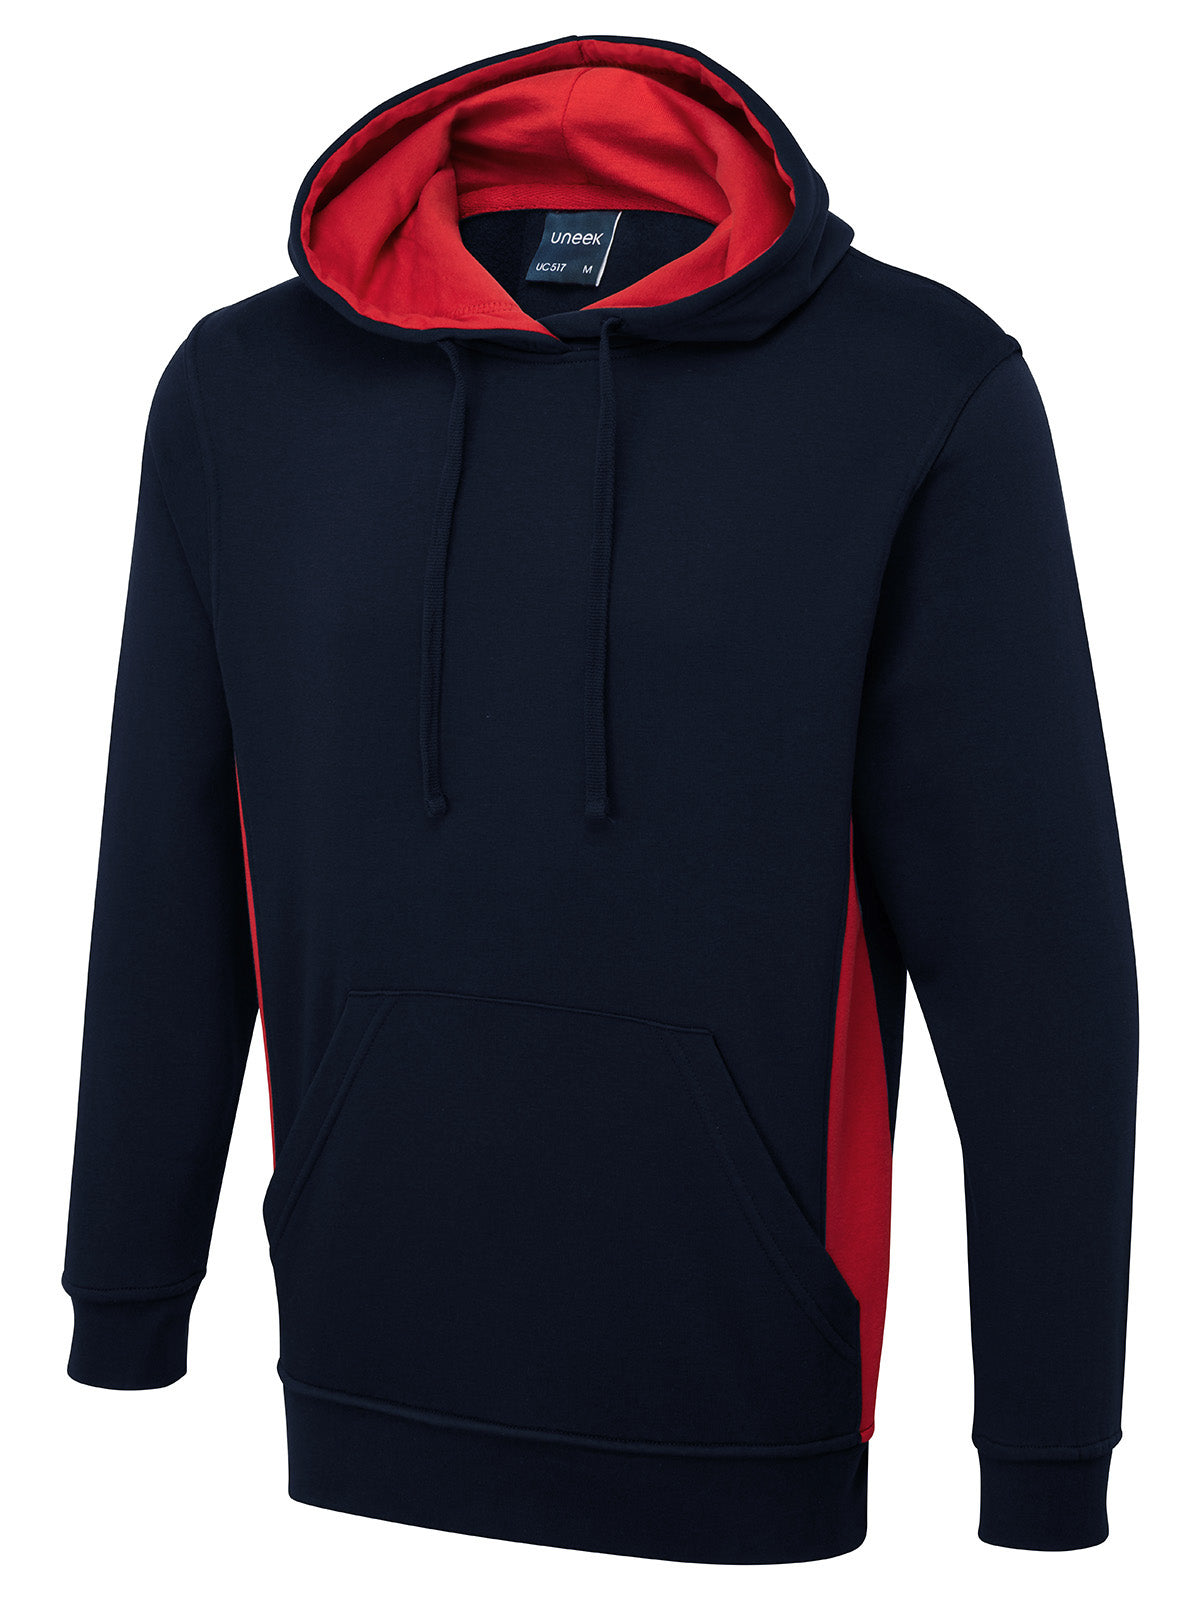 City Car Cup Unisex Two-Tone Hoodie